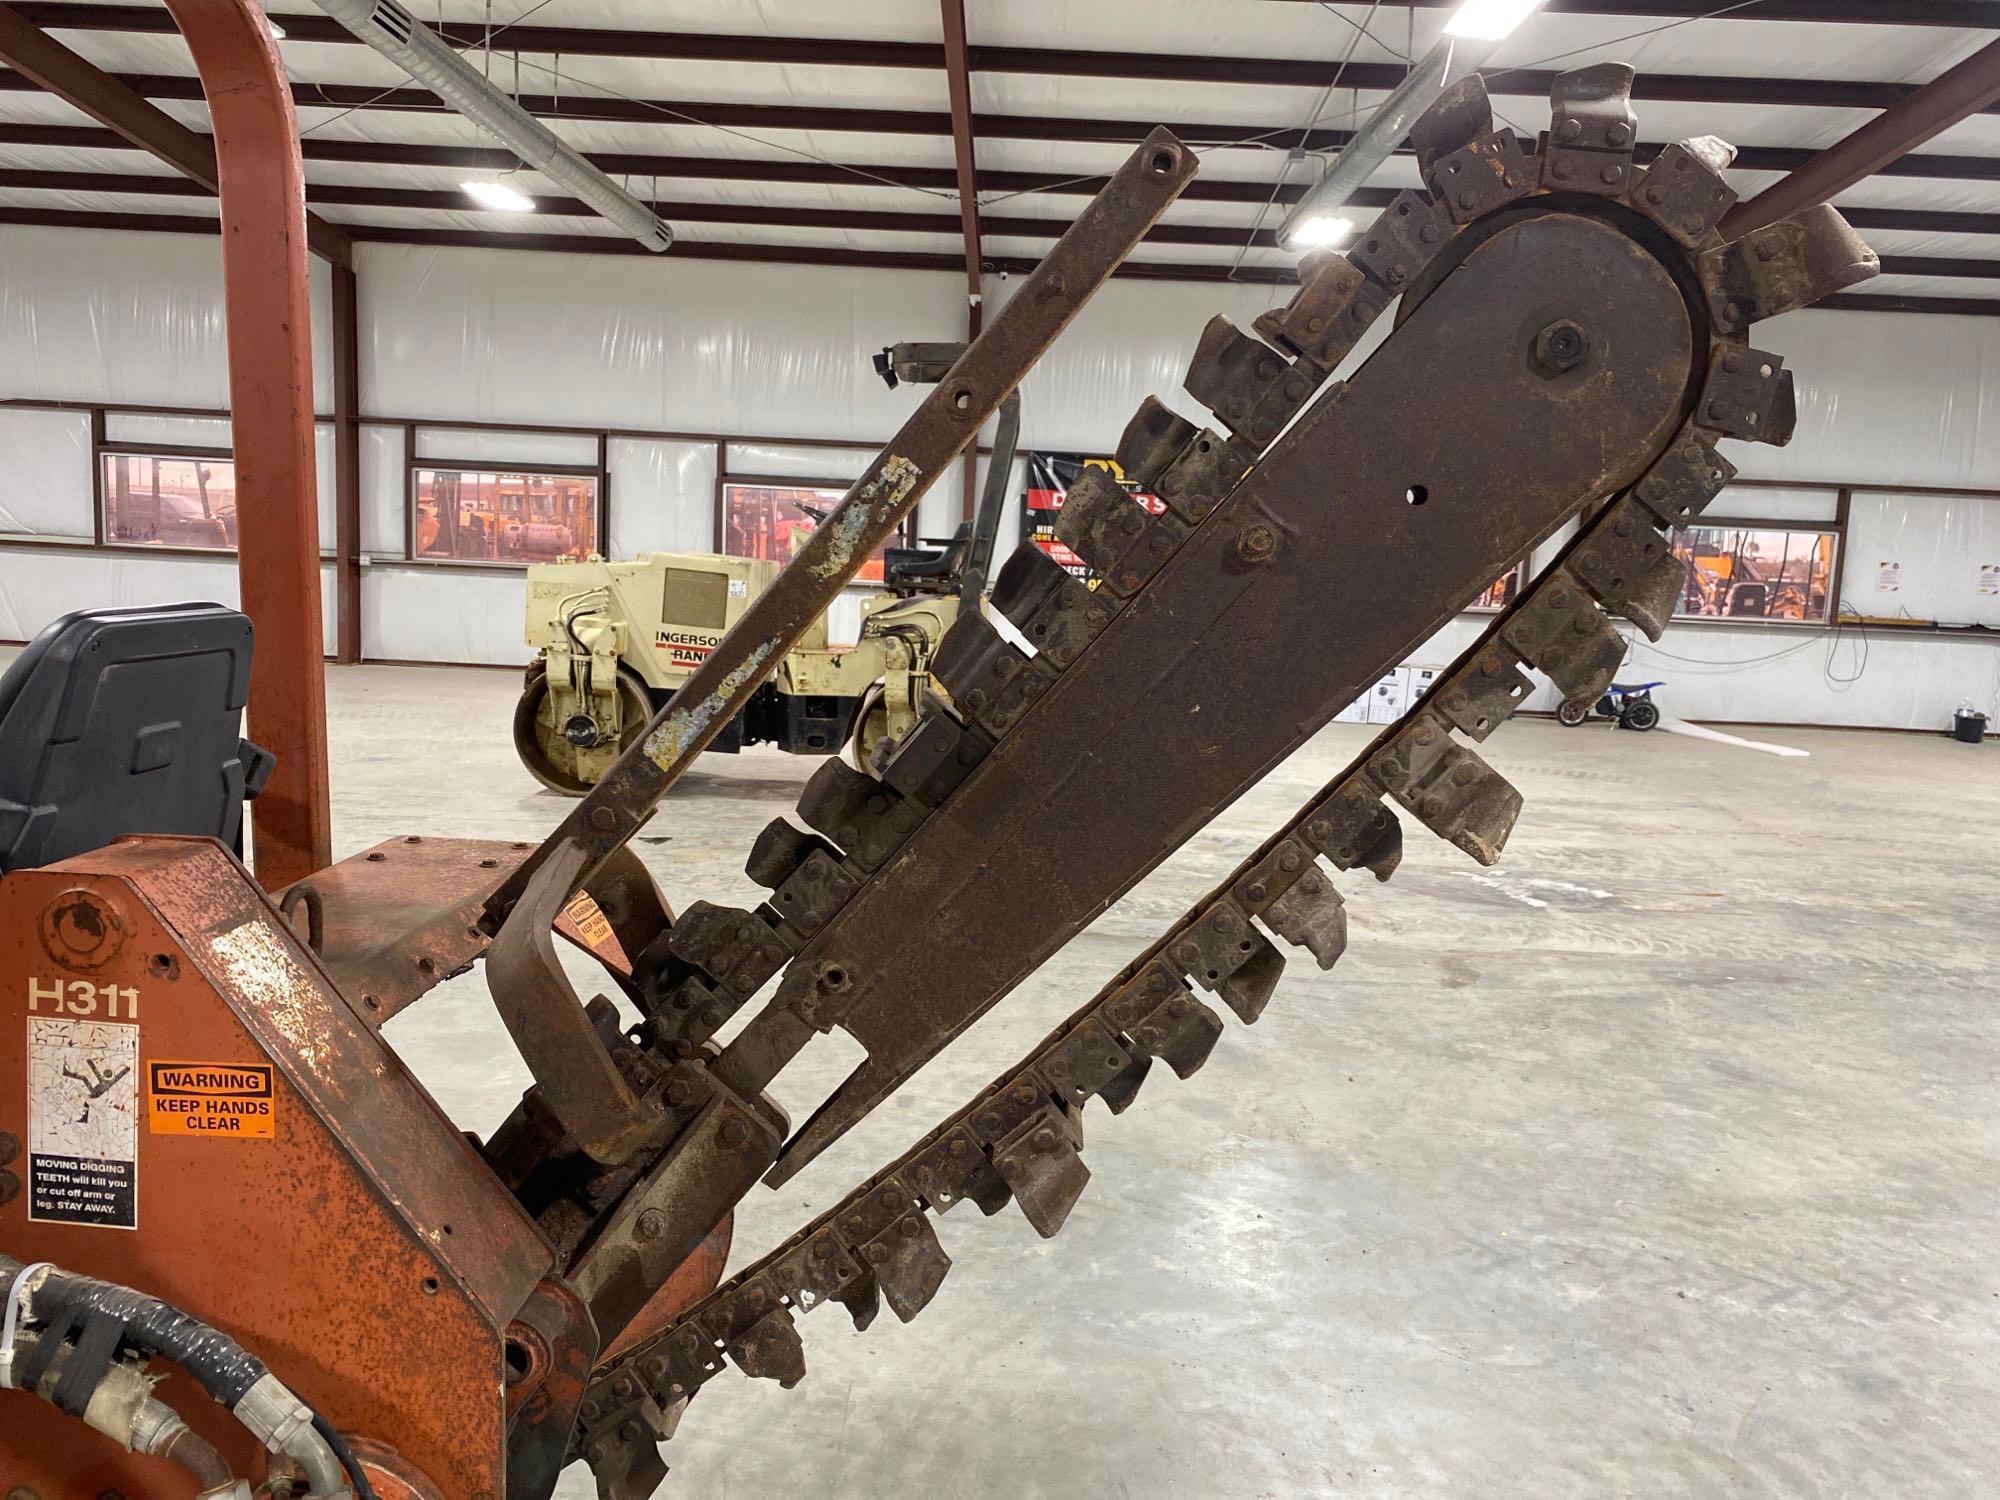 1996 Ditch Witch 3500 Trencher